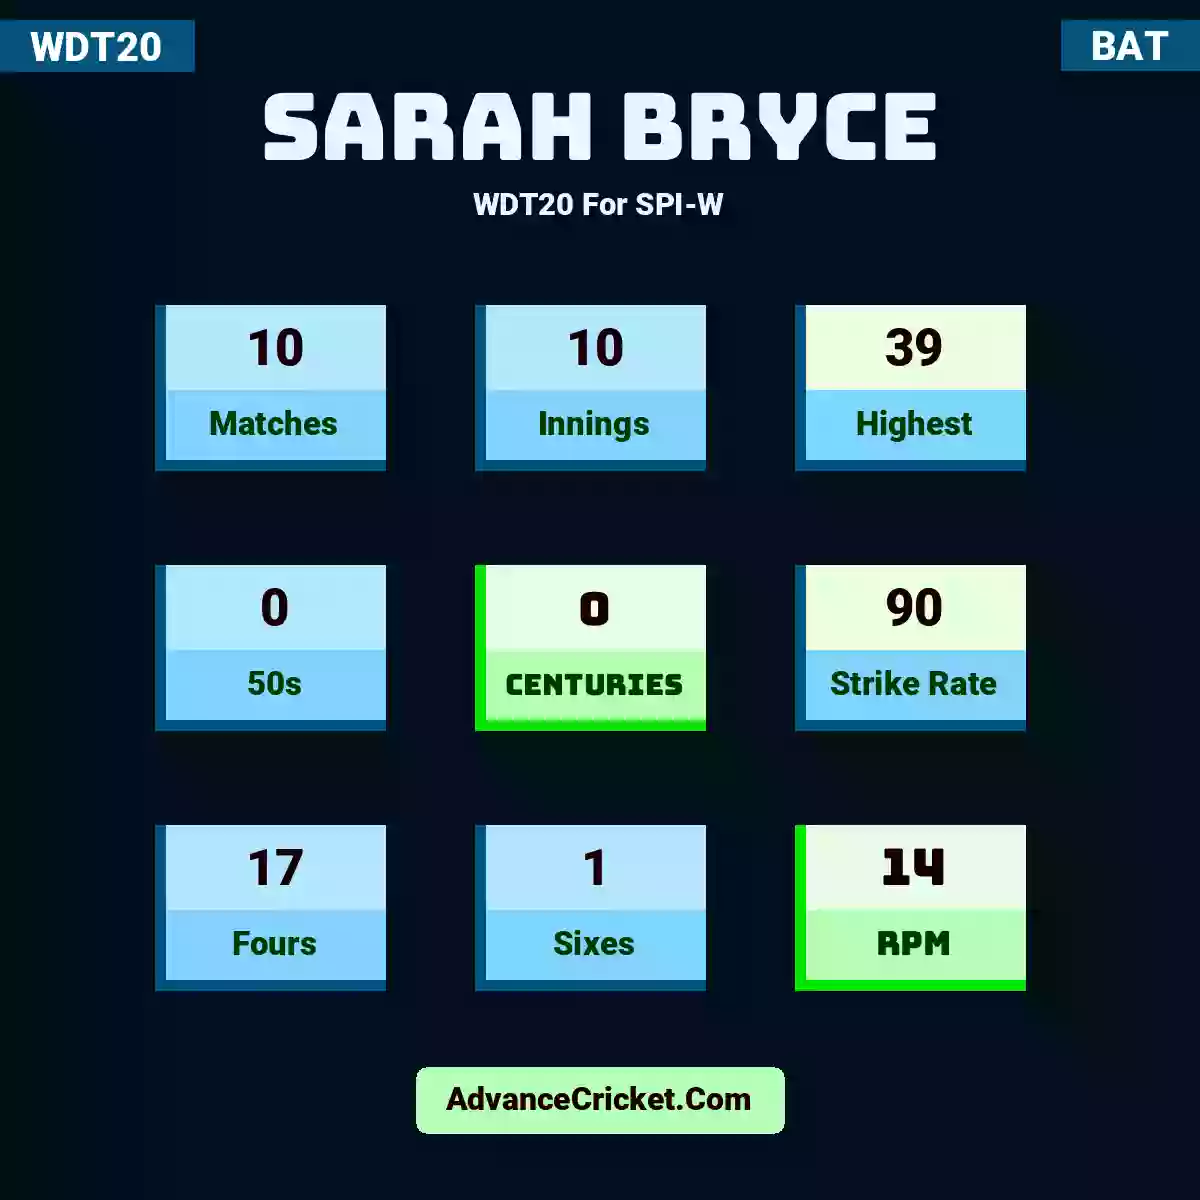 Sarah Bryce WDT20  For SPI-W, Sarah Bryce played 10 matches, scored 39 runs as highest, 0 half-centuries, and 0 centuries, with a strike rate of 90. S.Bryce hit 17 fours and 1 sixes, with an RPM of 14.